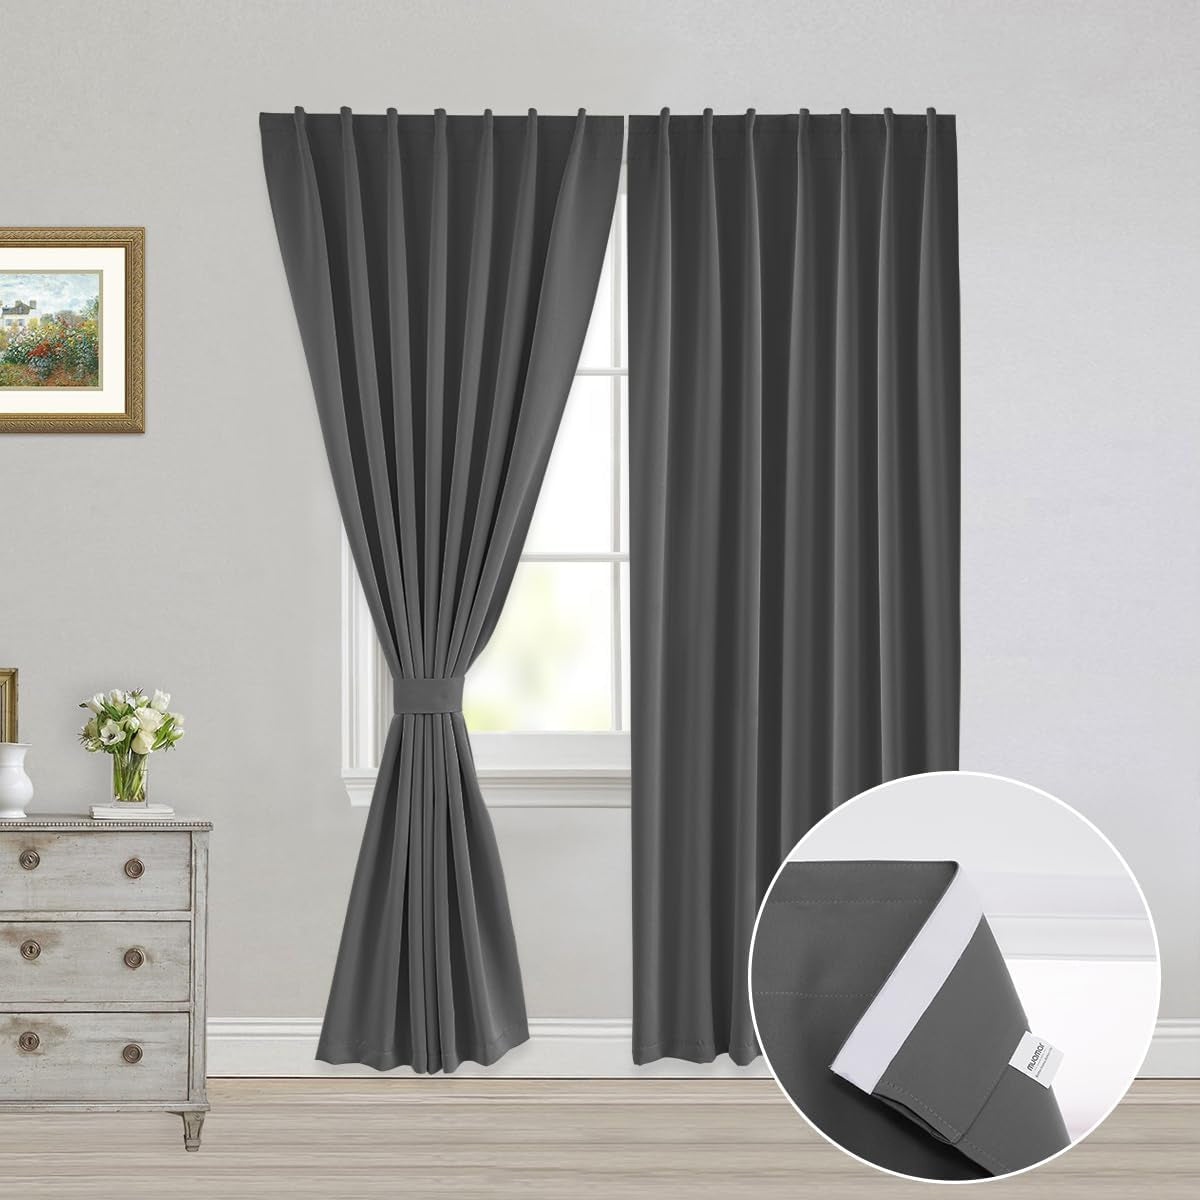 Muamar 2Pcs Blackout Curtains Privacy Curtains 63 Inch Length Window Curtains,Easy Install Thermal Insulated Window Shades,Stick Curtains No Rods, Black 42" W X 63" L  Muamar Grey 42"W X 84"L 